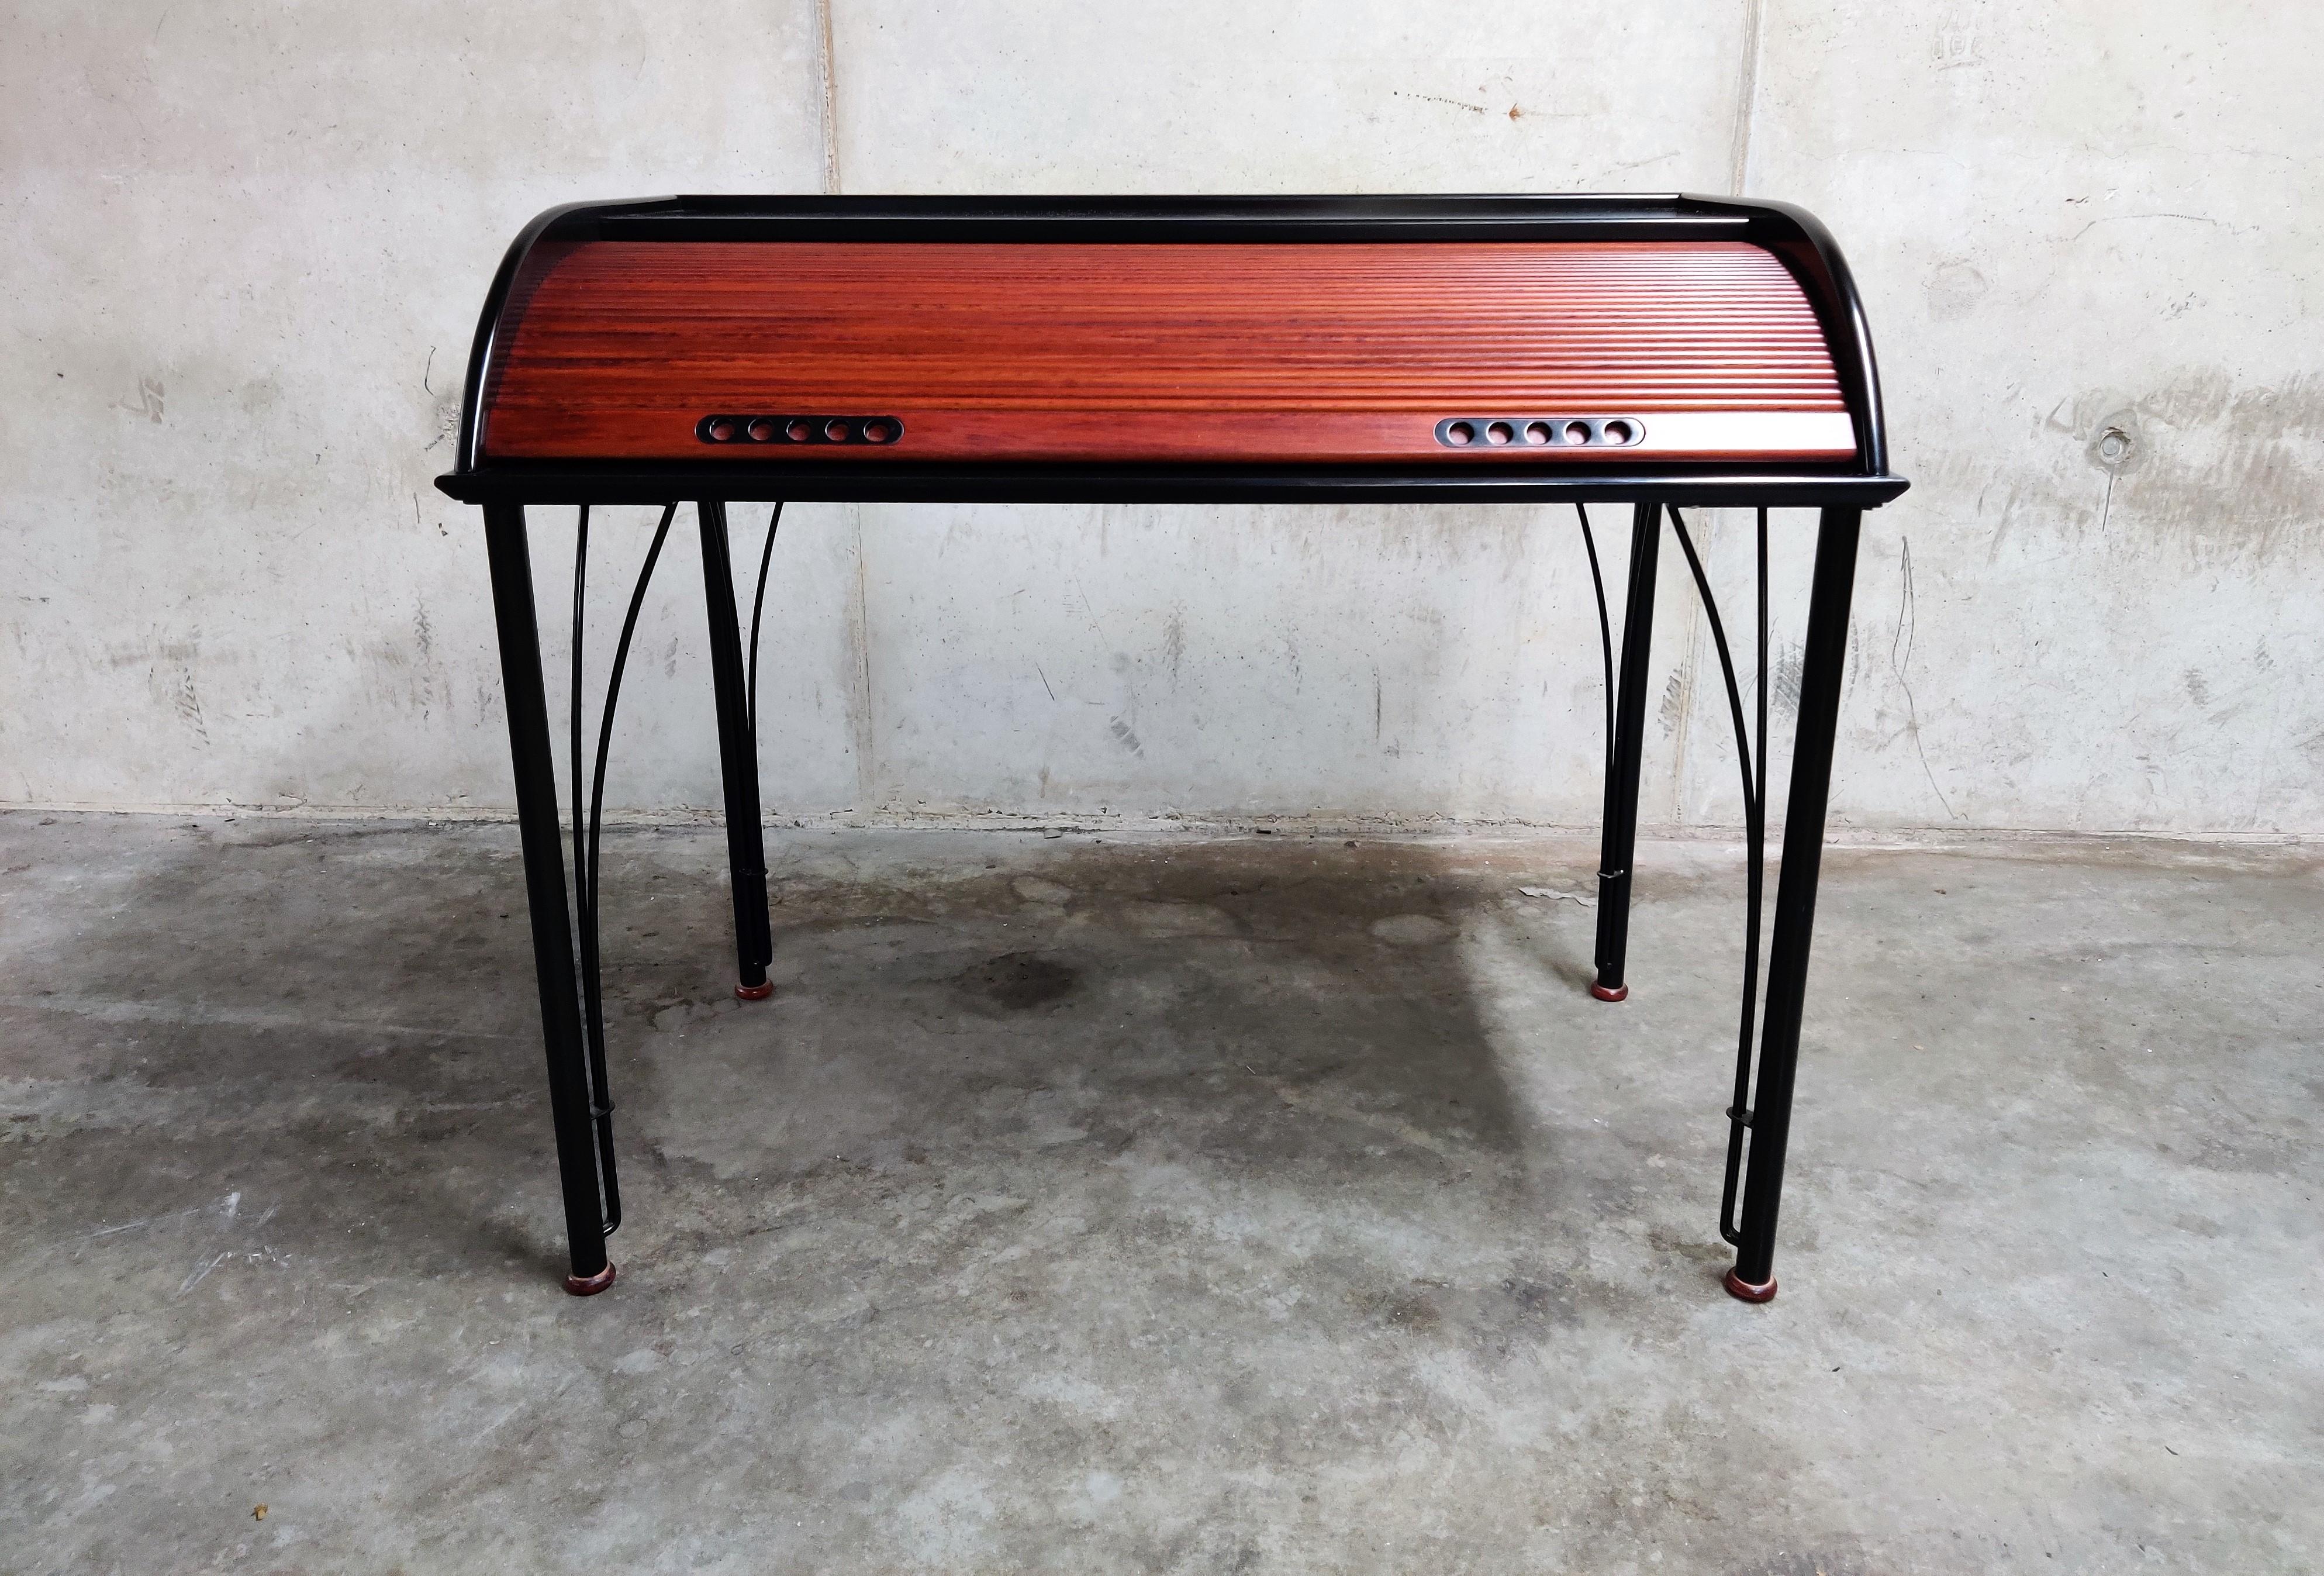 Elegant secretary desk by Pagnon Patrick & Pelhaitre Claude designed in 1988 for Ligne Roset.

This rare and unique desk is made of high quality materials with steel legs, lacquered wood and mahogany roll-up 'door'.

The original and labeled